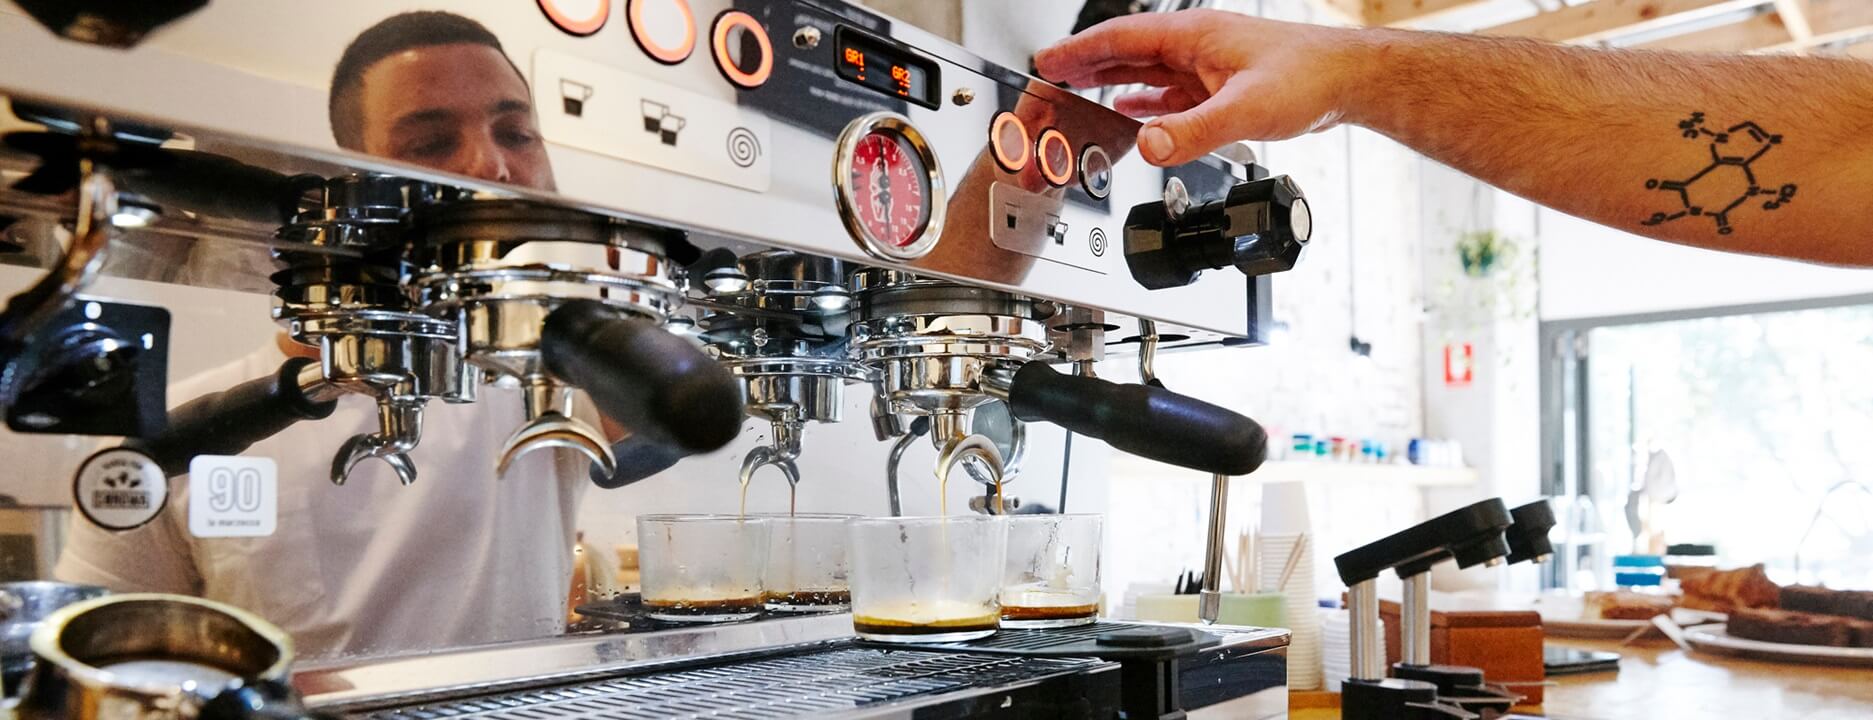 Coffee being made by commercial coffee machine